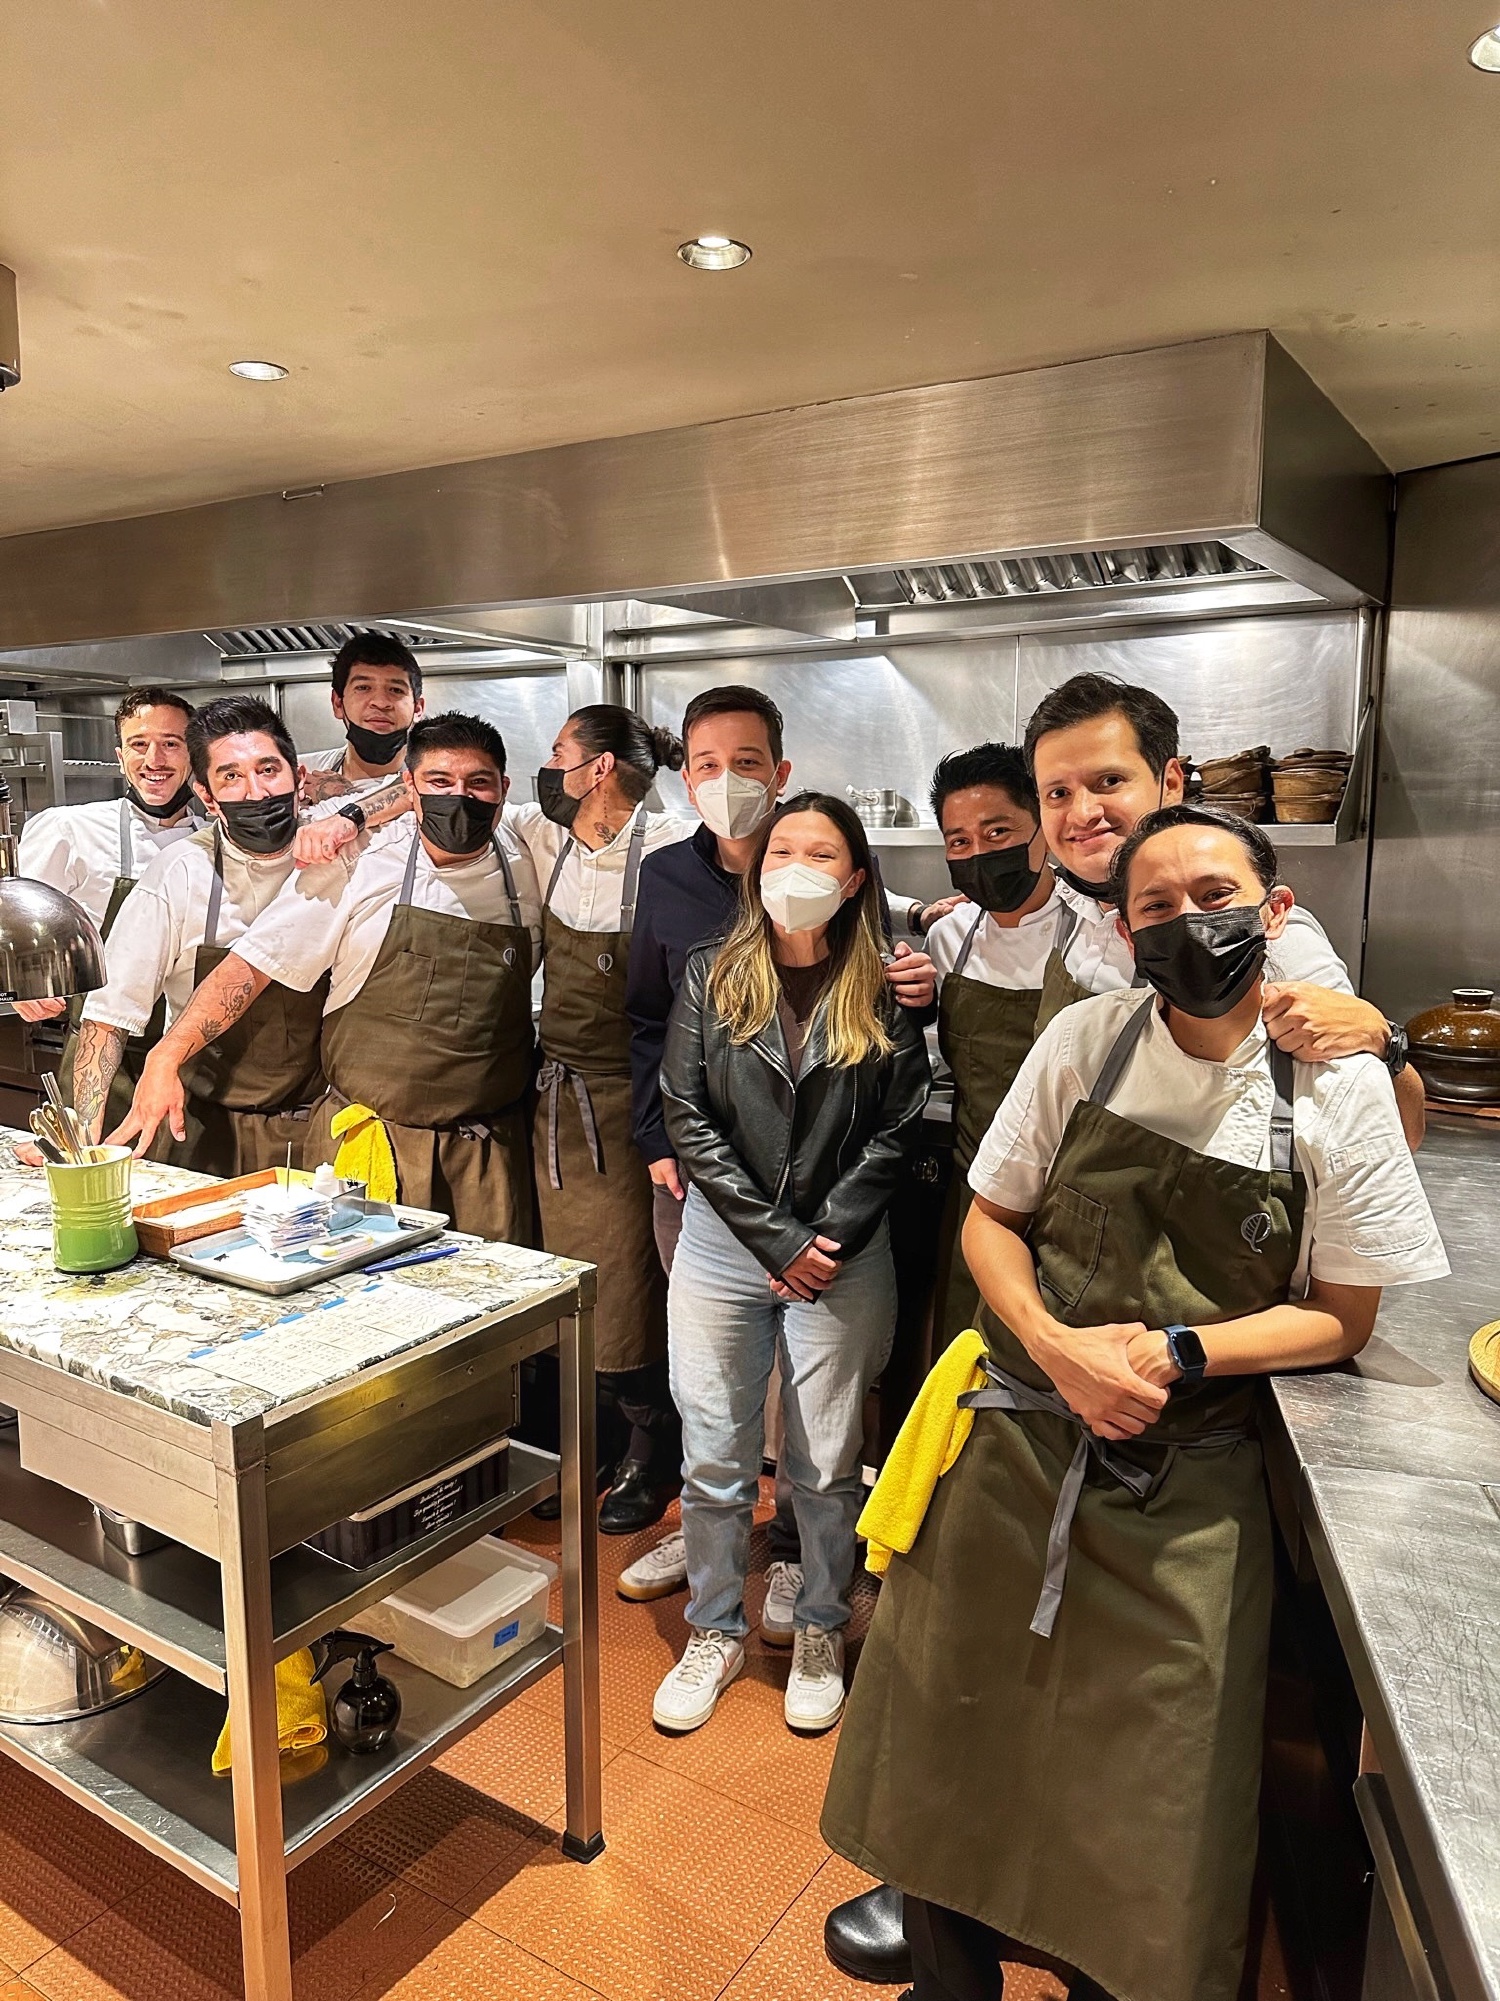 We were also given the chance to enter the kitchen and take photos with Chef Jorge and his staff! 10/10 would recommend this place.